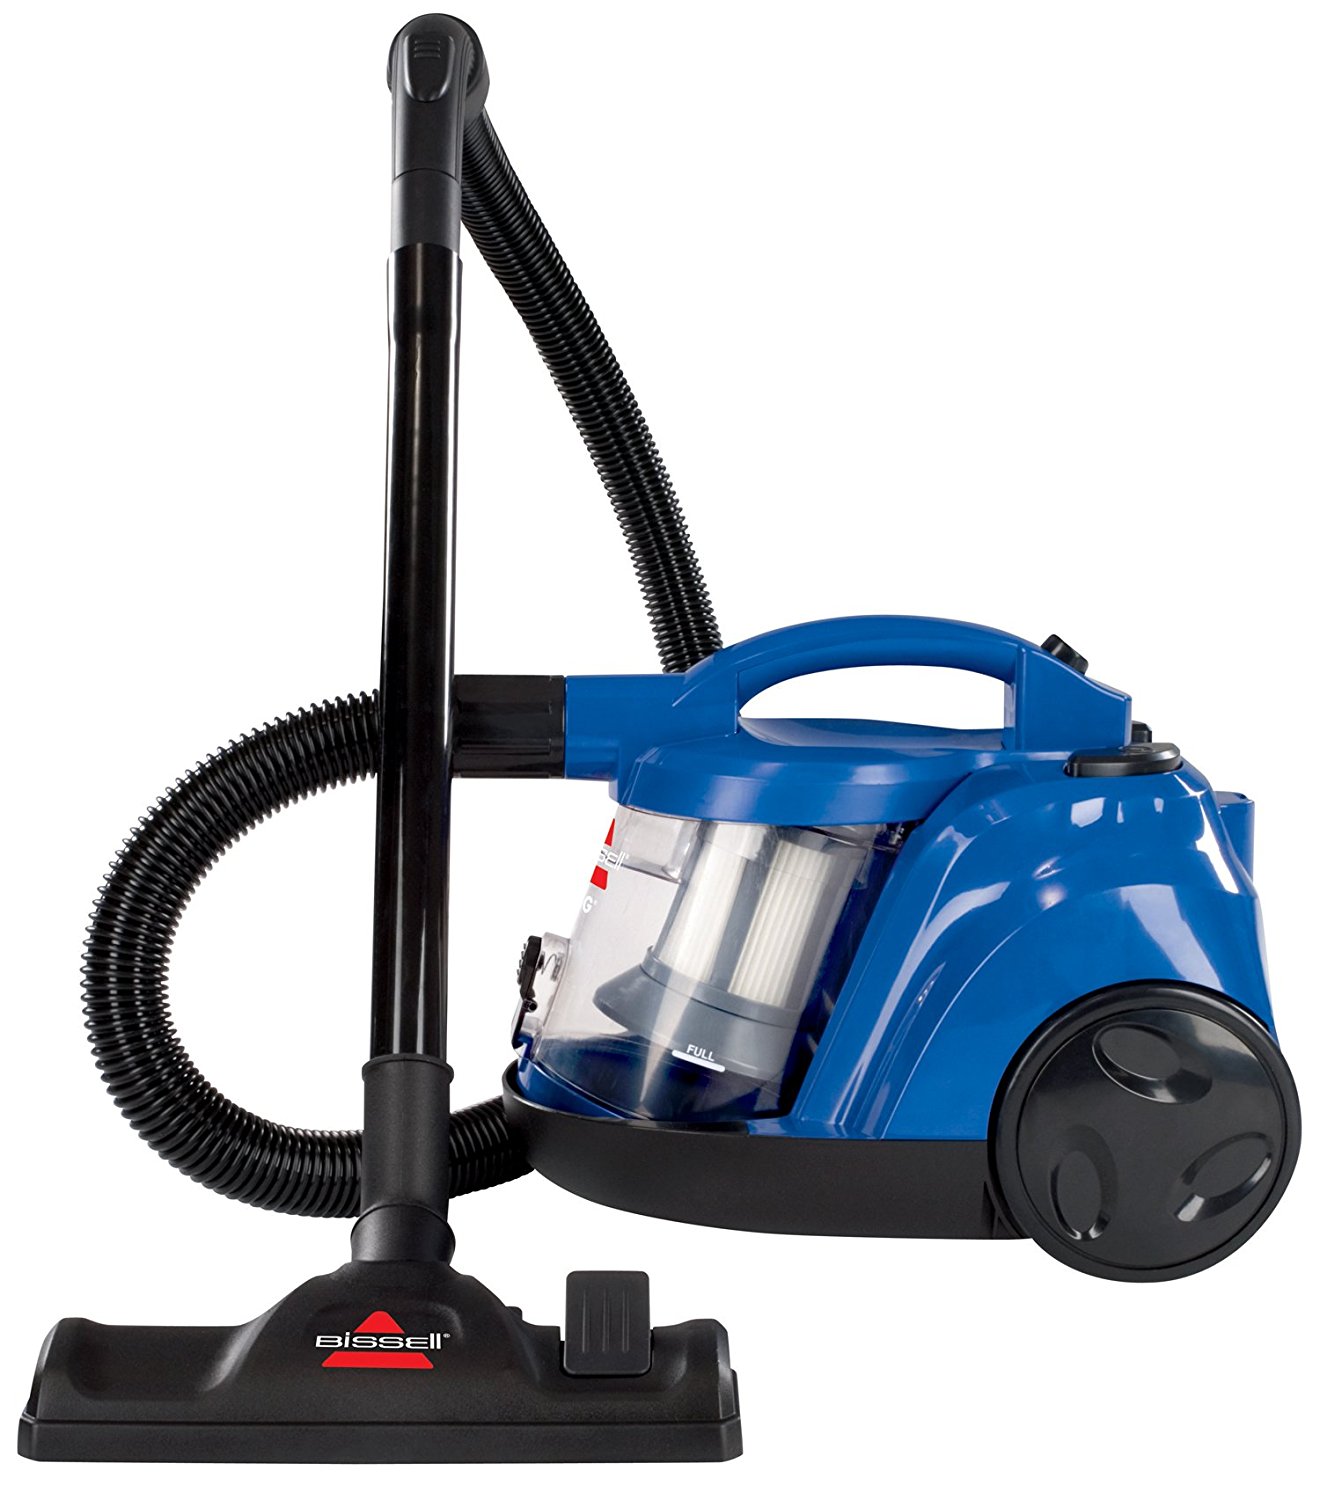 Bissell 6489 Zing Rewind Bagless Canister Vacuum side